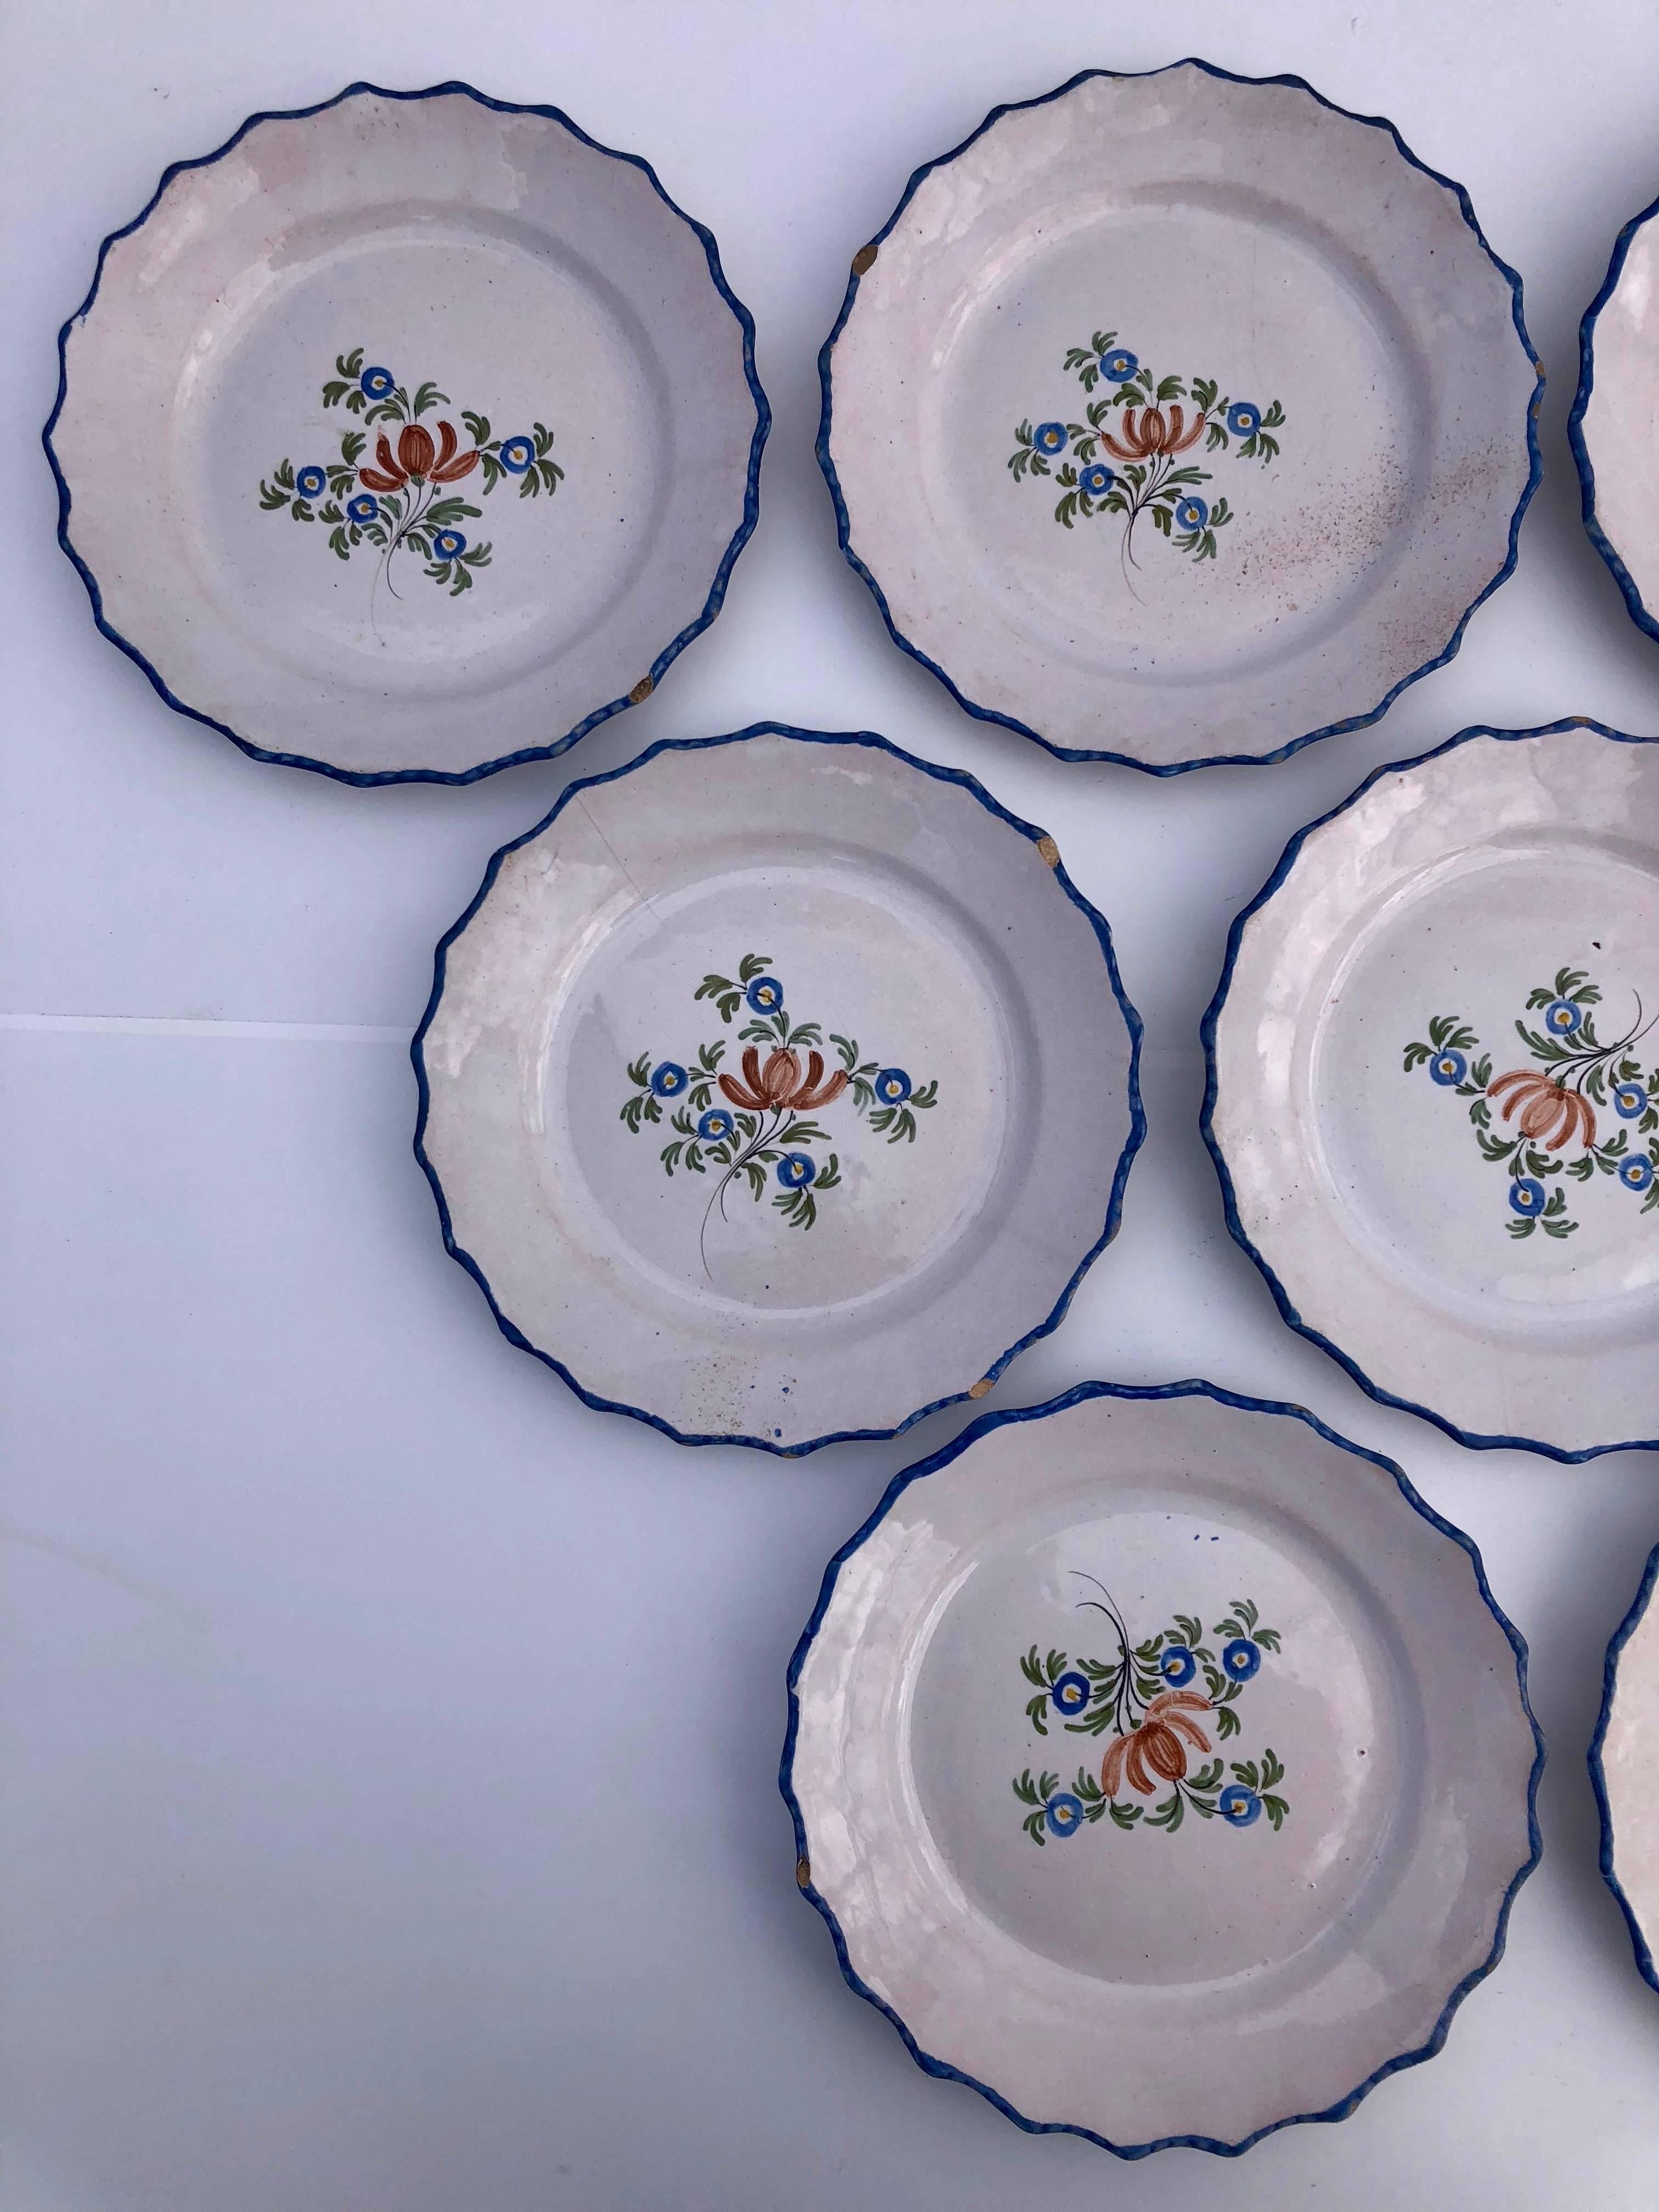 These are a beautiful set of nine French Chantilly faïence plates from the 1700s. These are very rare soft faïence plates from the early years when the French started to make soft faïence, without kaolin. They have a lovely hand-painted pink flower